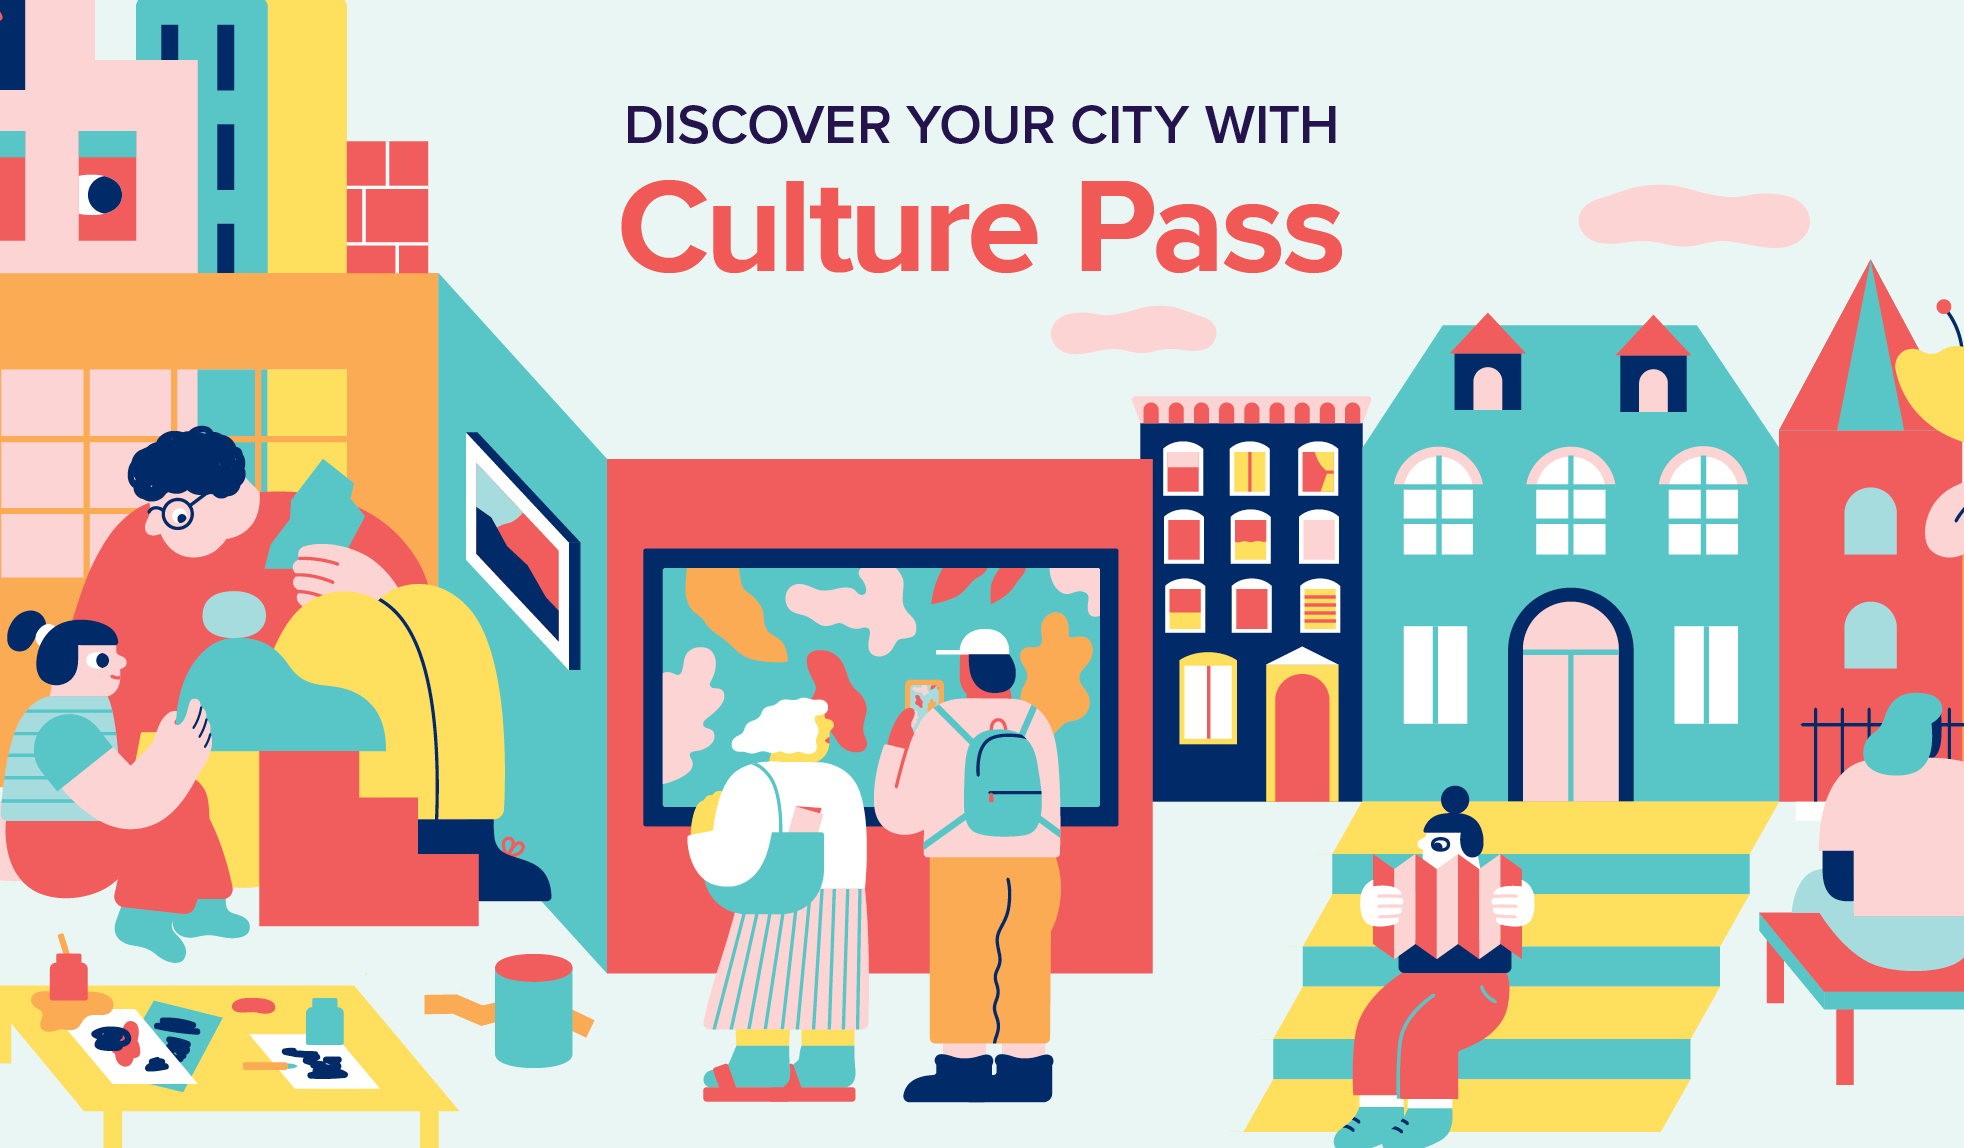 Use your library card to get your FREE passes to more than 95 museums, theaters, and more!